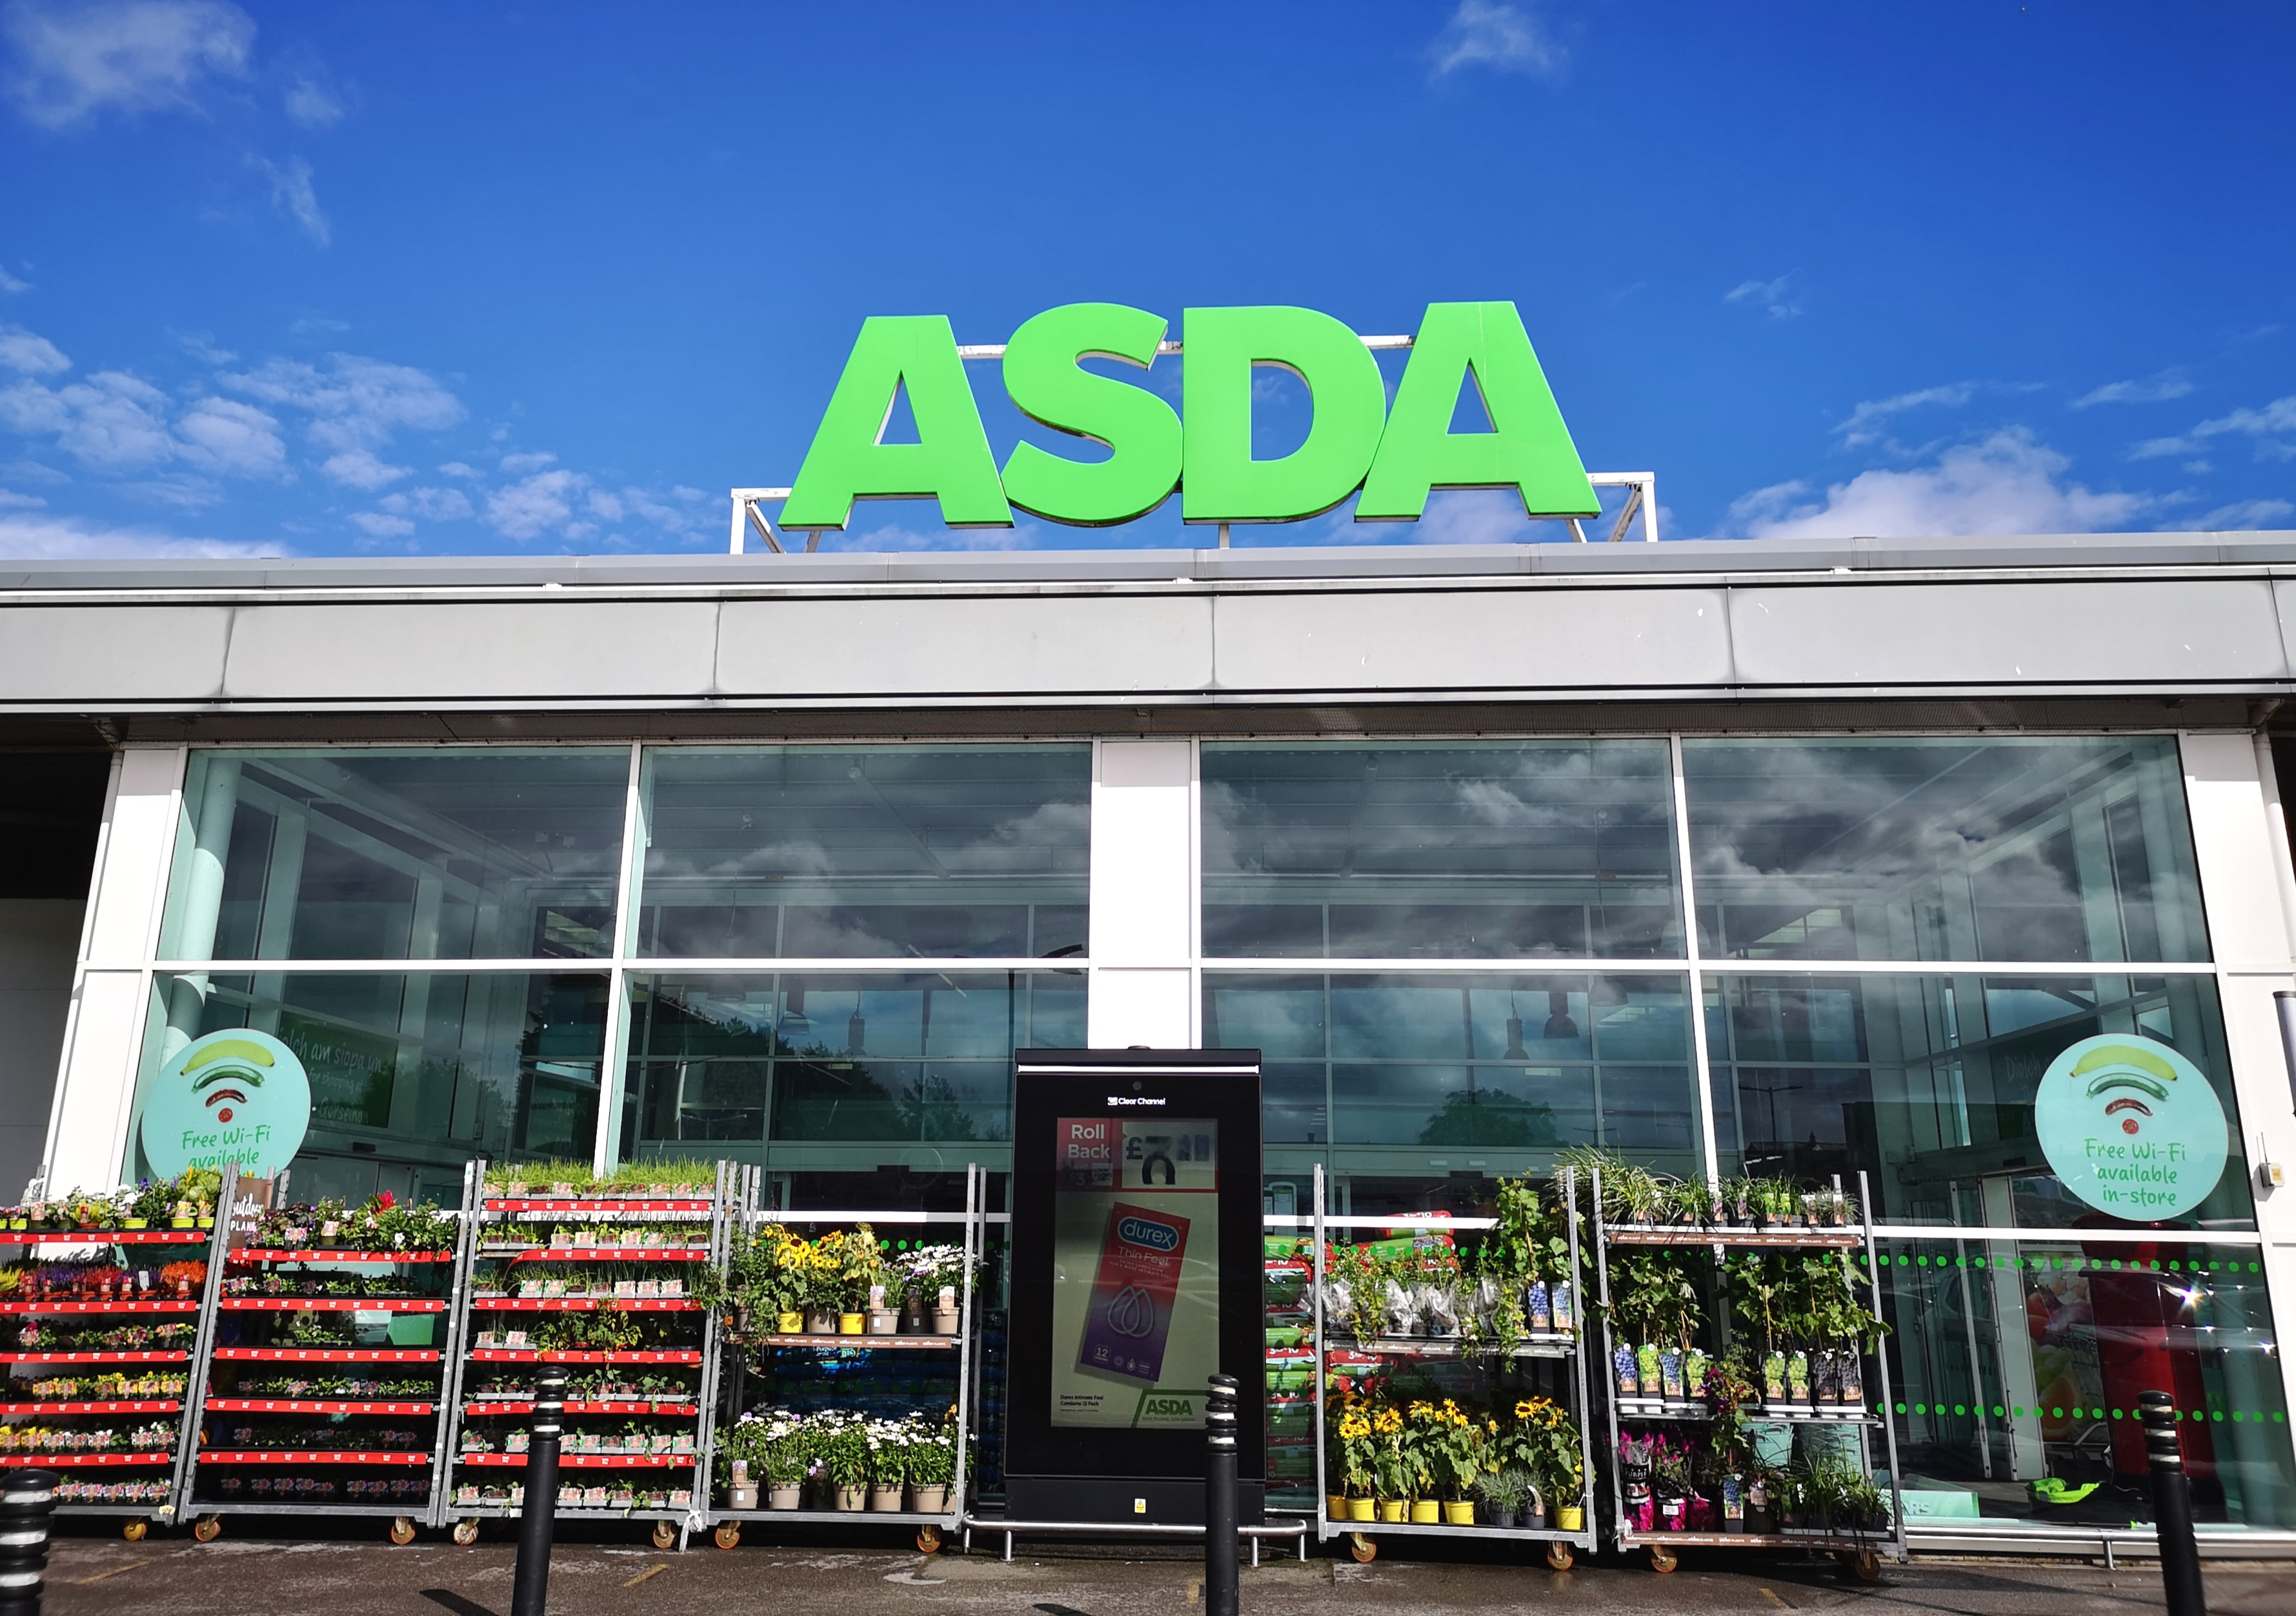 Asda is one of the supermarkets Brits can get their hands on free food vouchers for